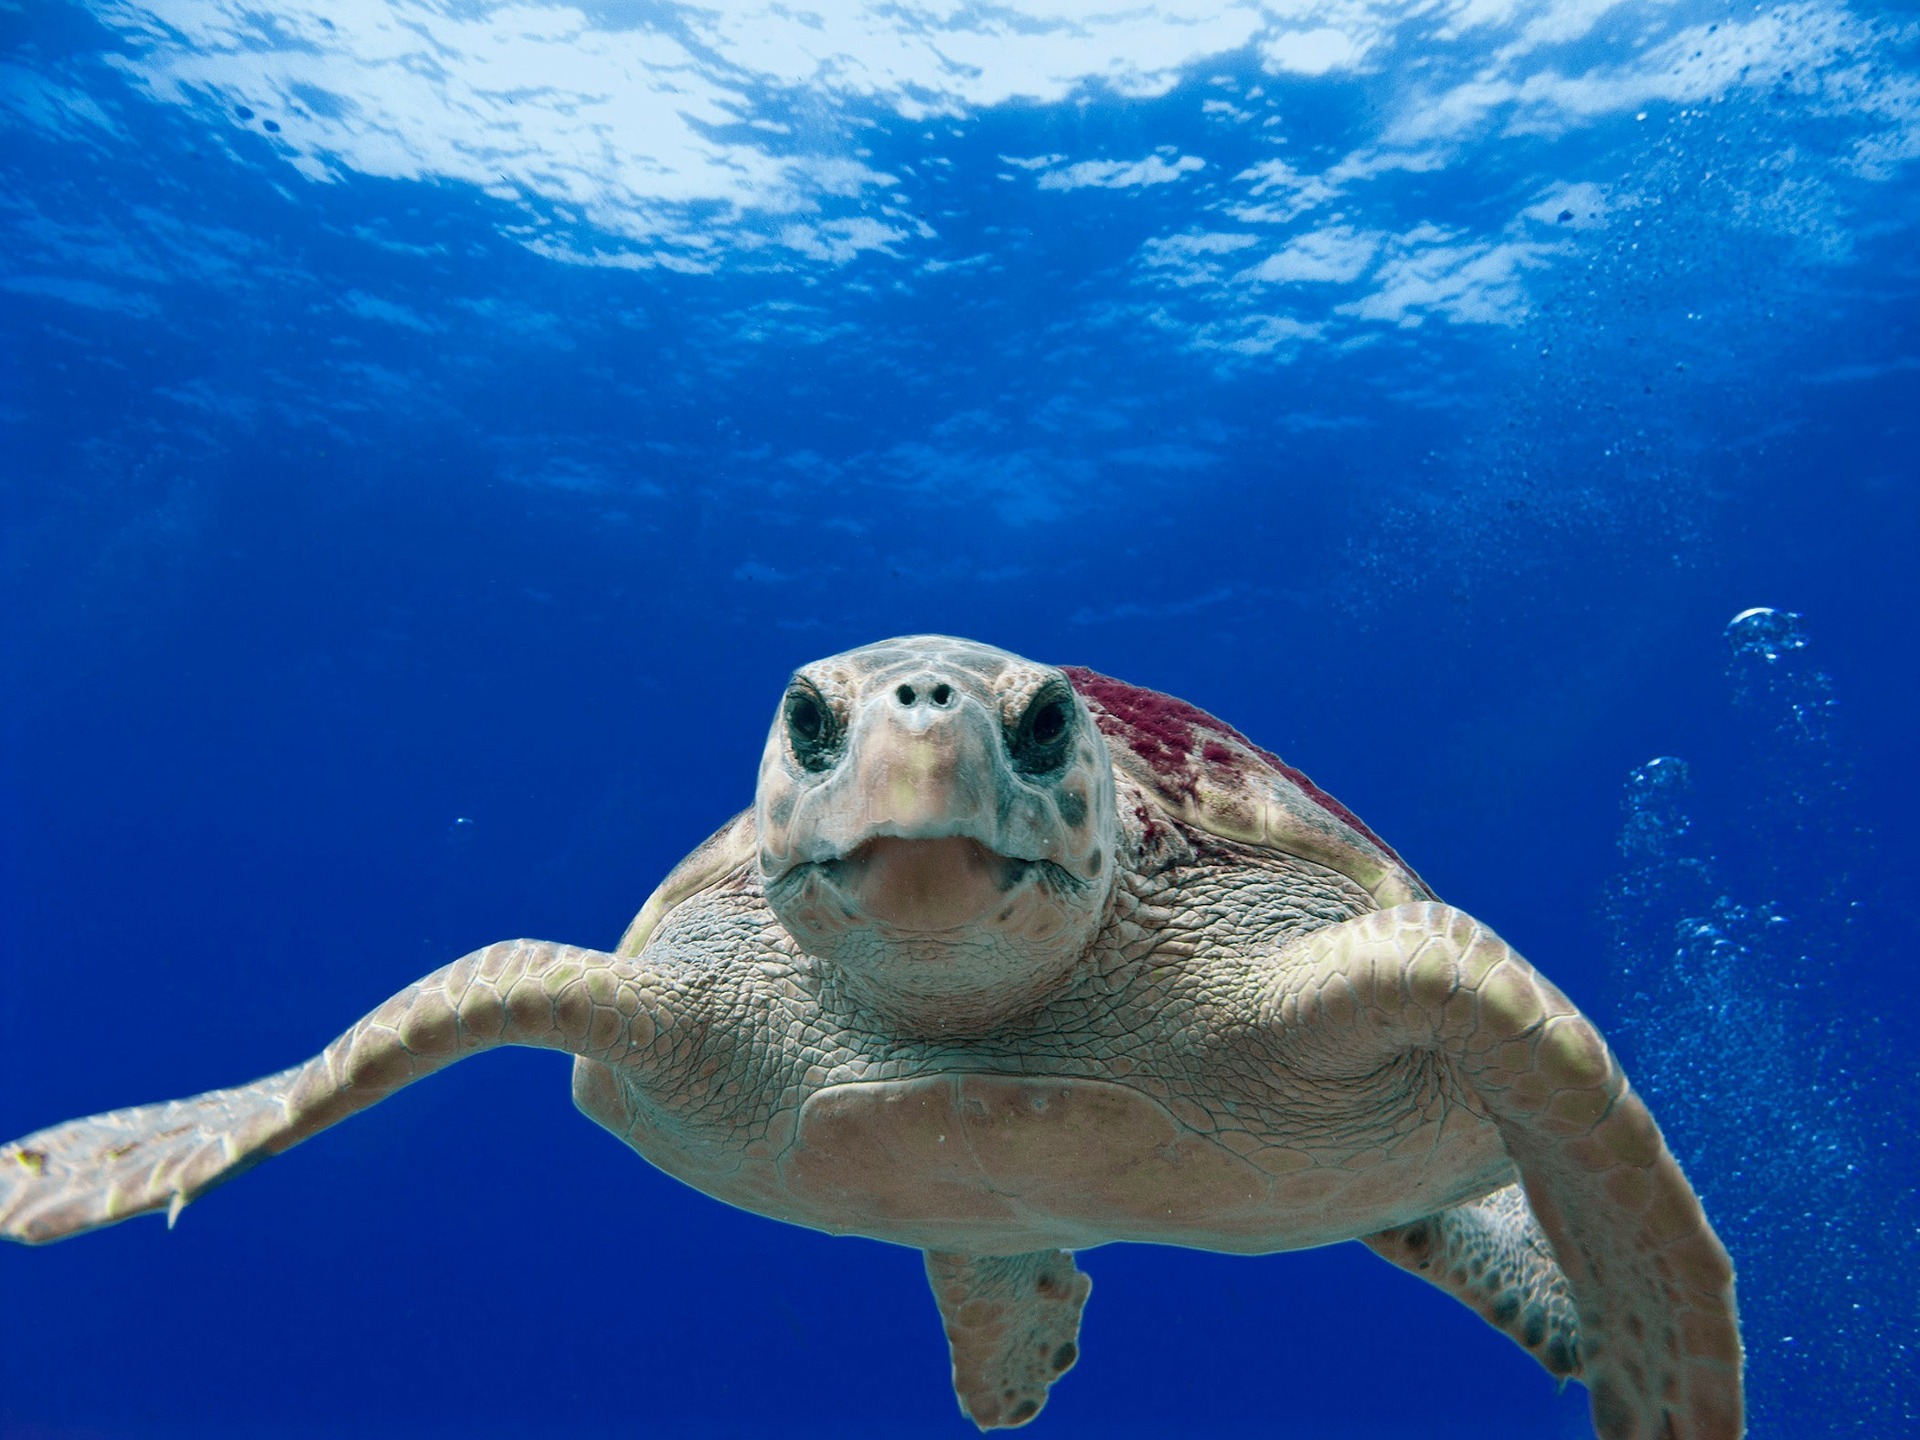 A sea turtle in blue water swimming toward the camera